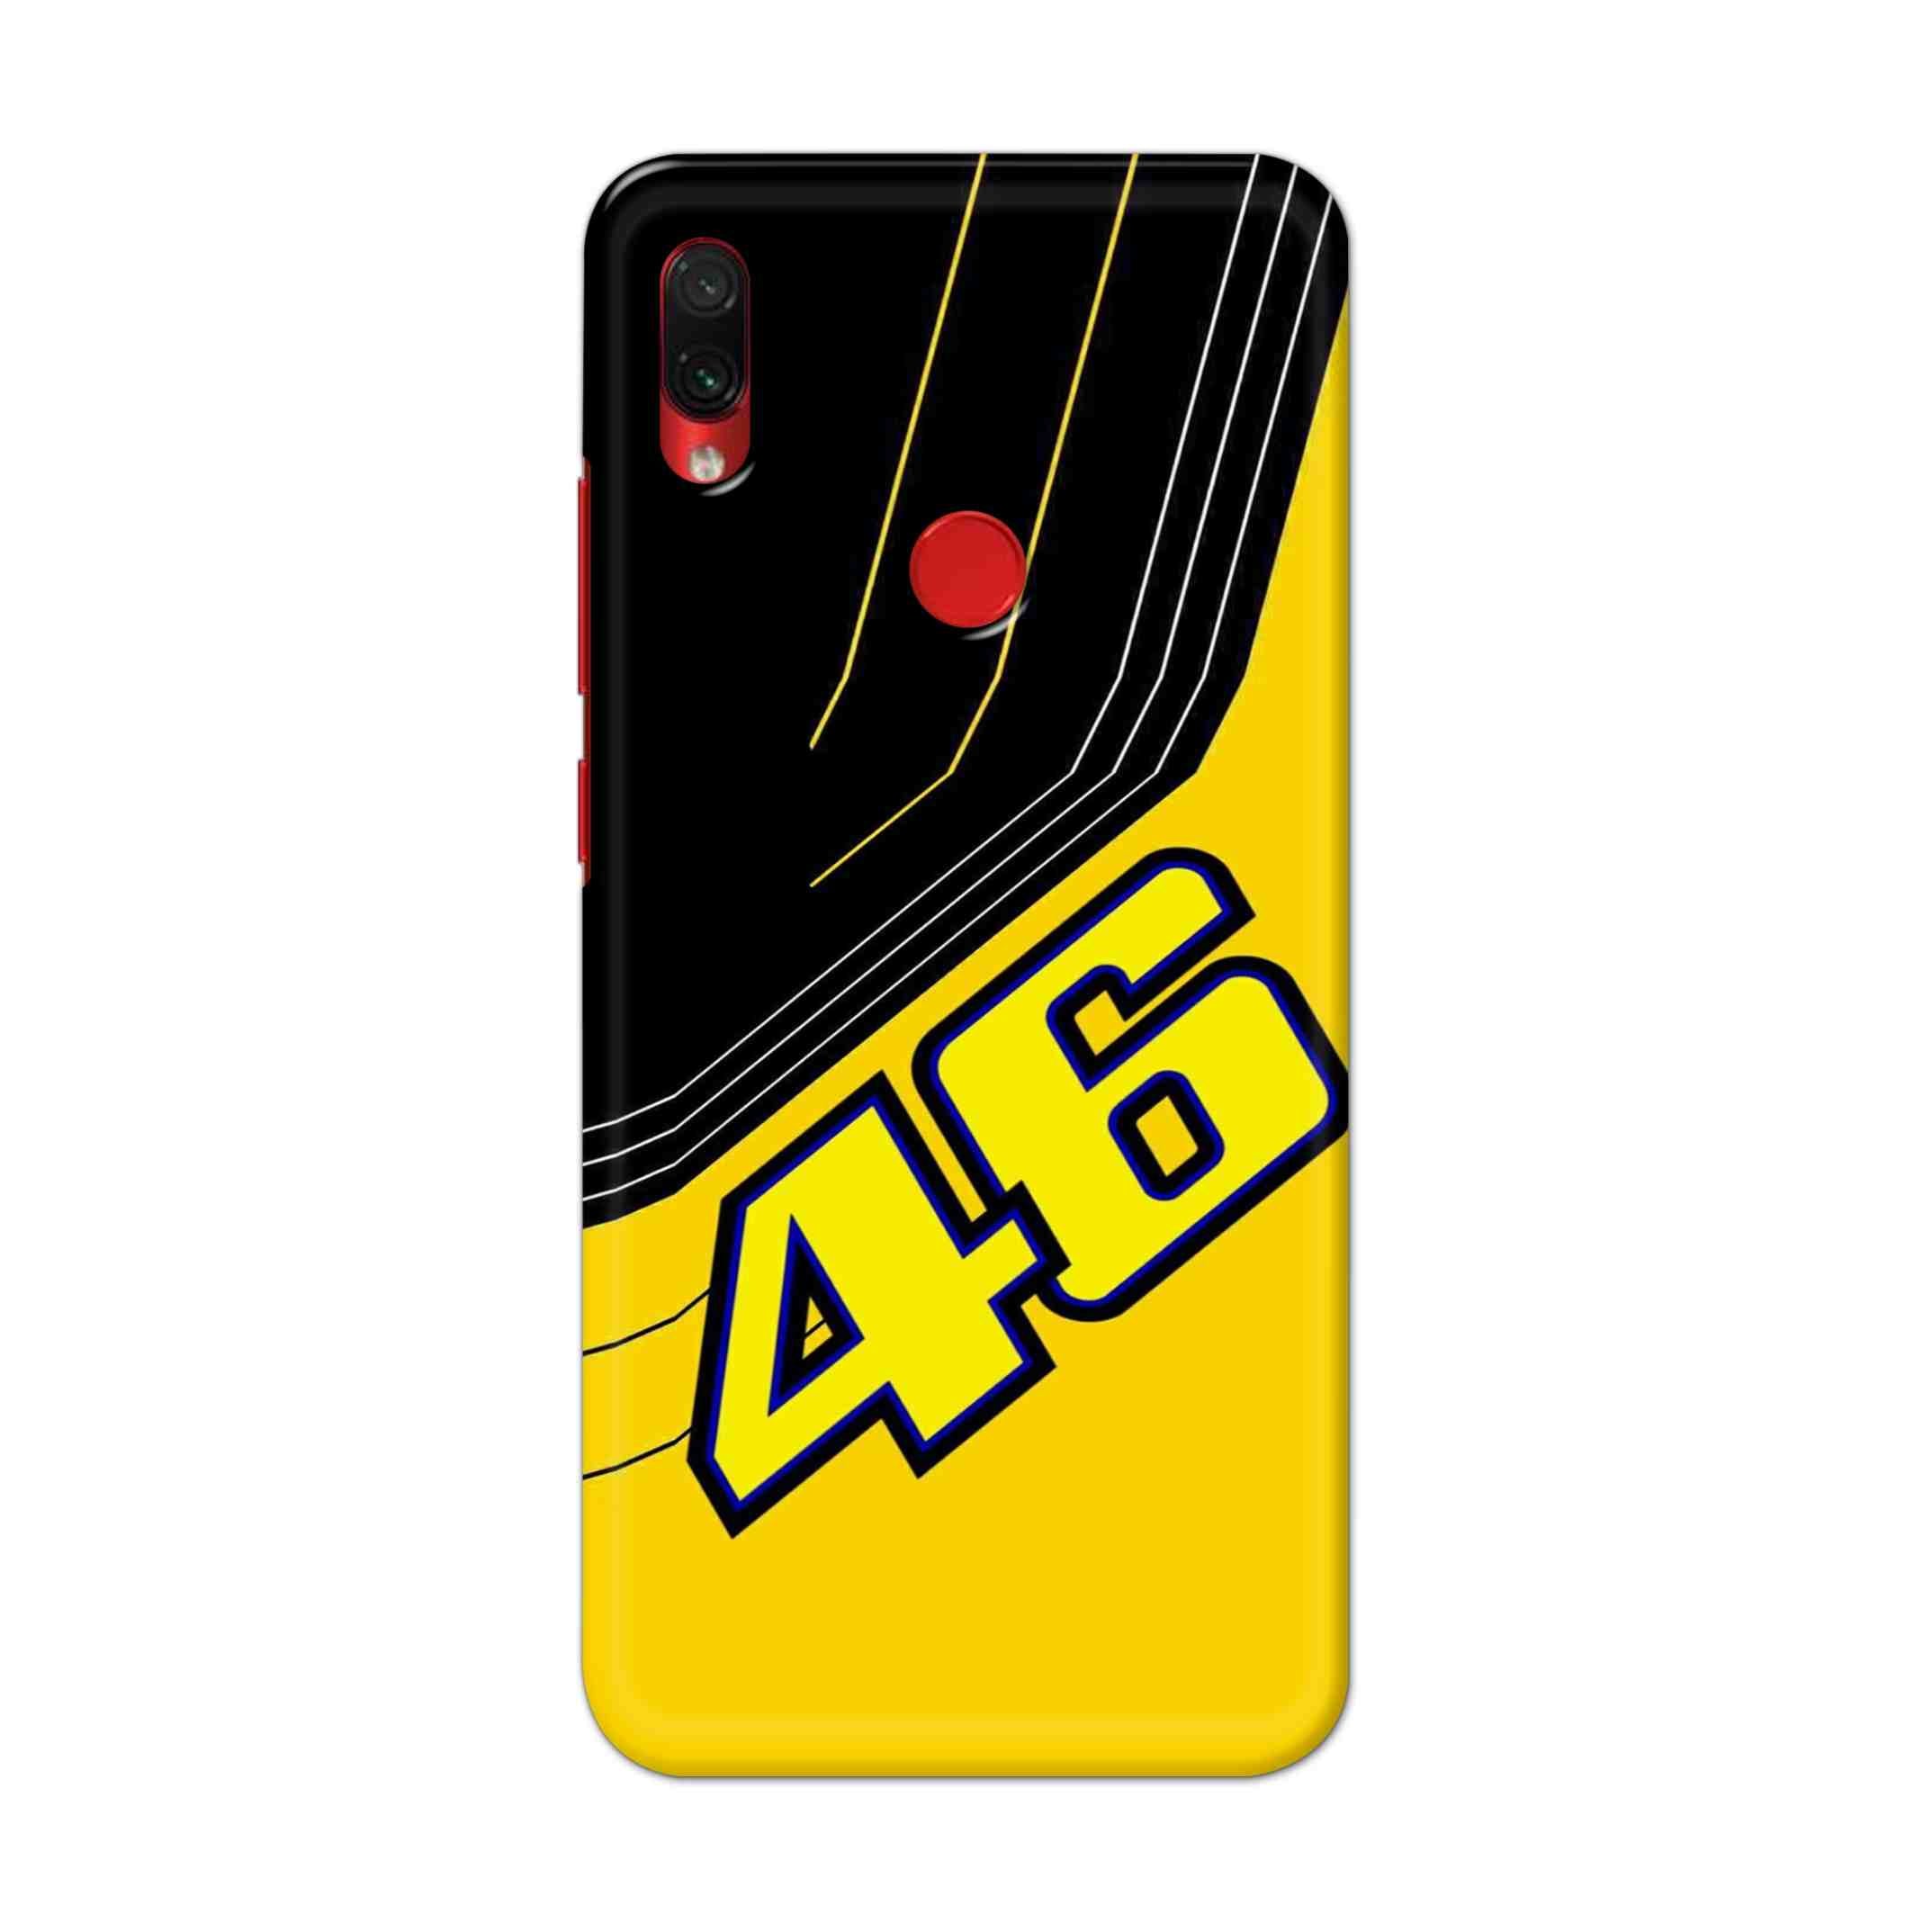 Buy 46 Hard Back Mobile Phone Case Cover For Xiaomi Redmi Note 7S Online